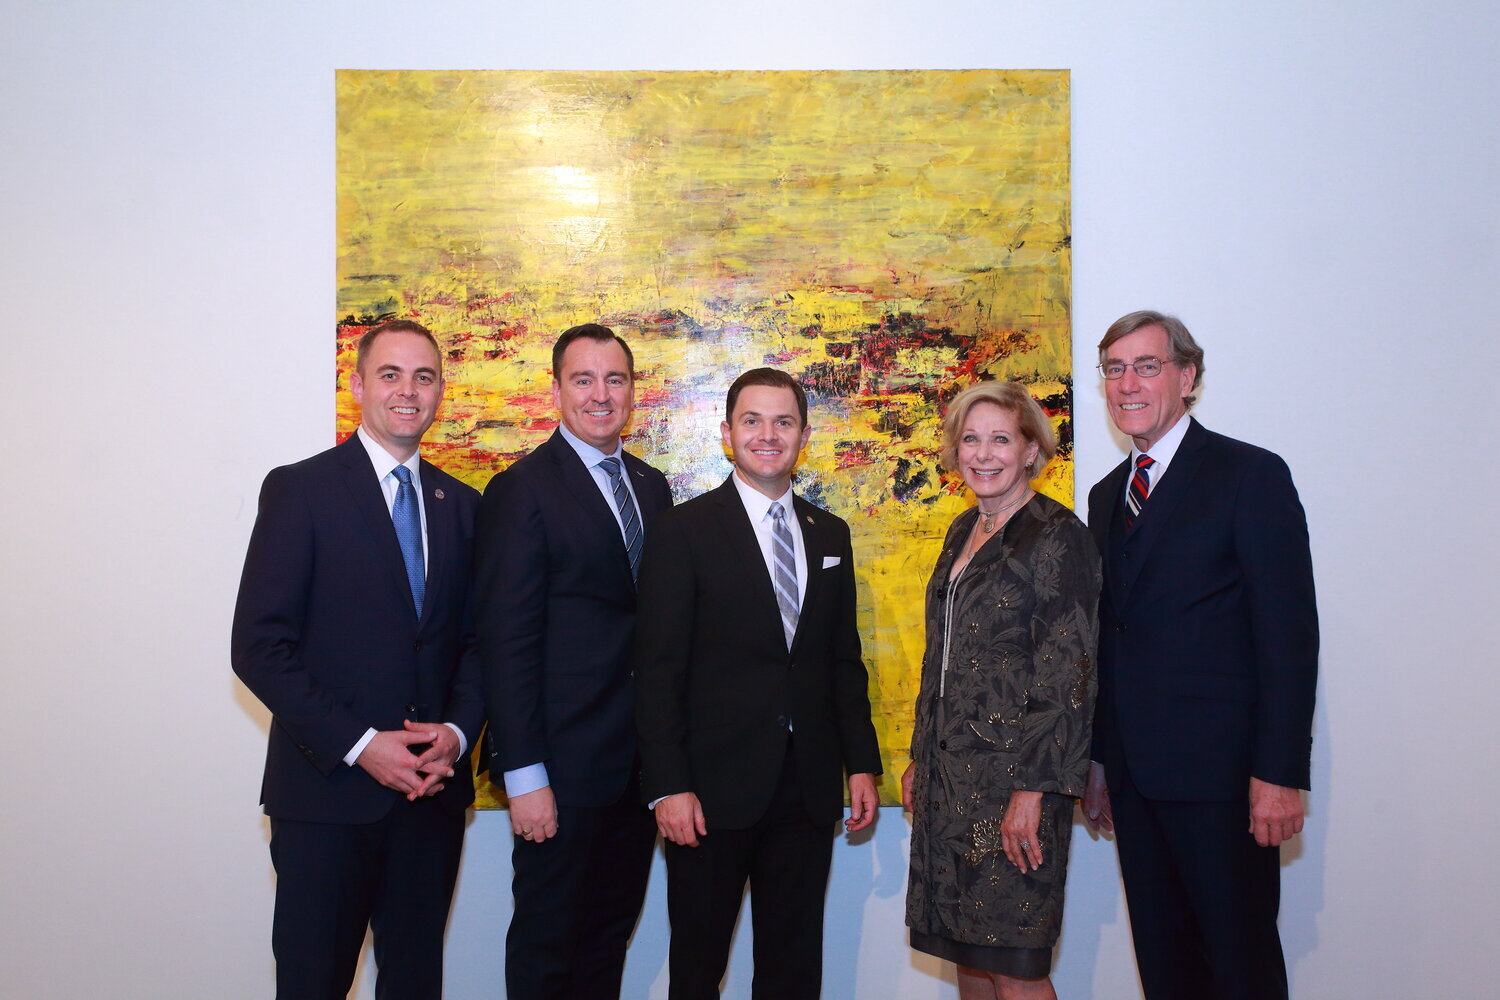 Miles Hansen, Gregory Hughes, Brad Herbert, Susan Swartz, and A. Scott Anderson pictured in front of Evolving Visions 3, a gift to CAFA from Zions Bank and the State of Utah